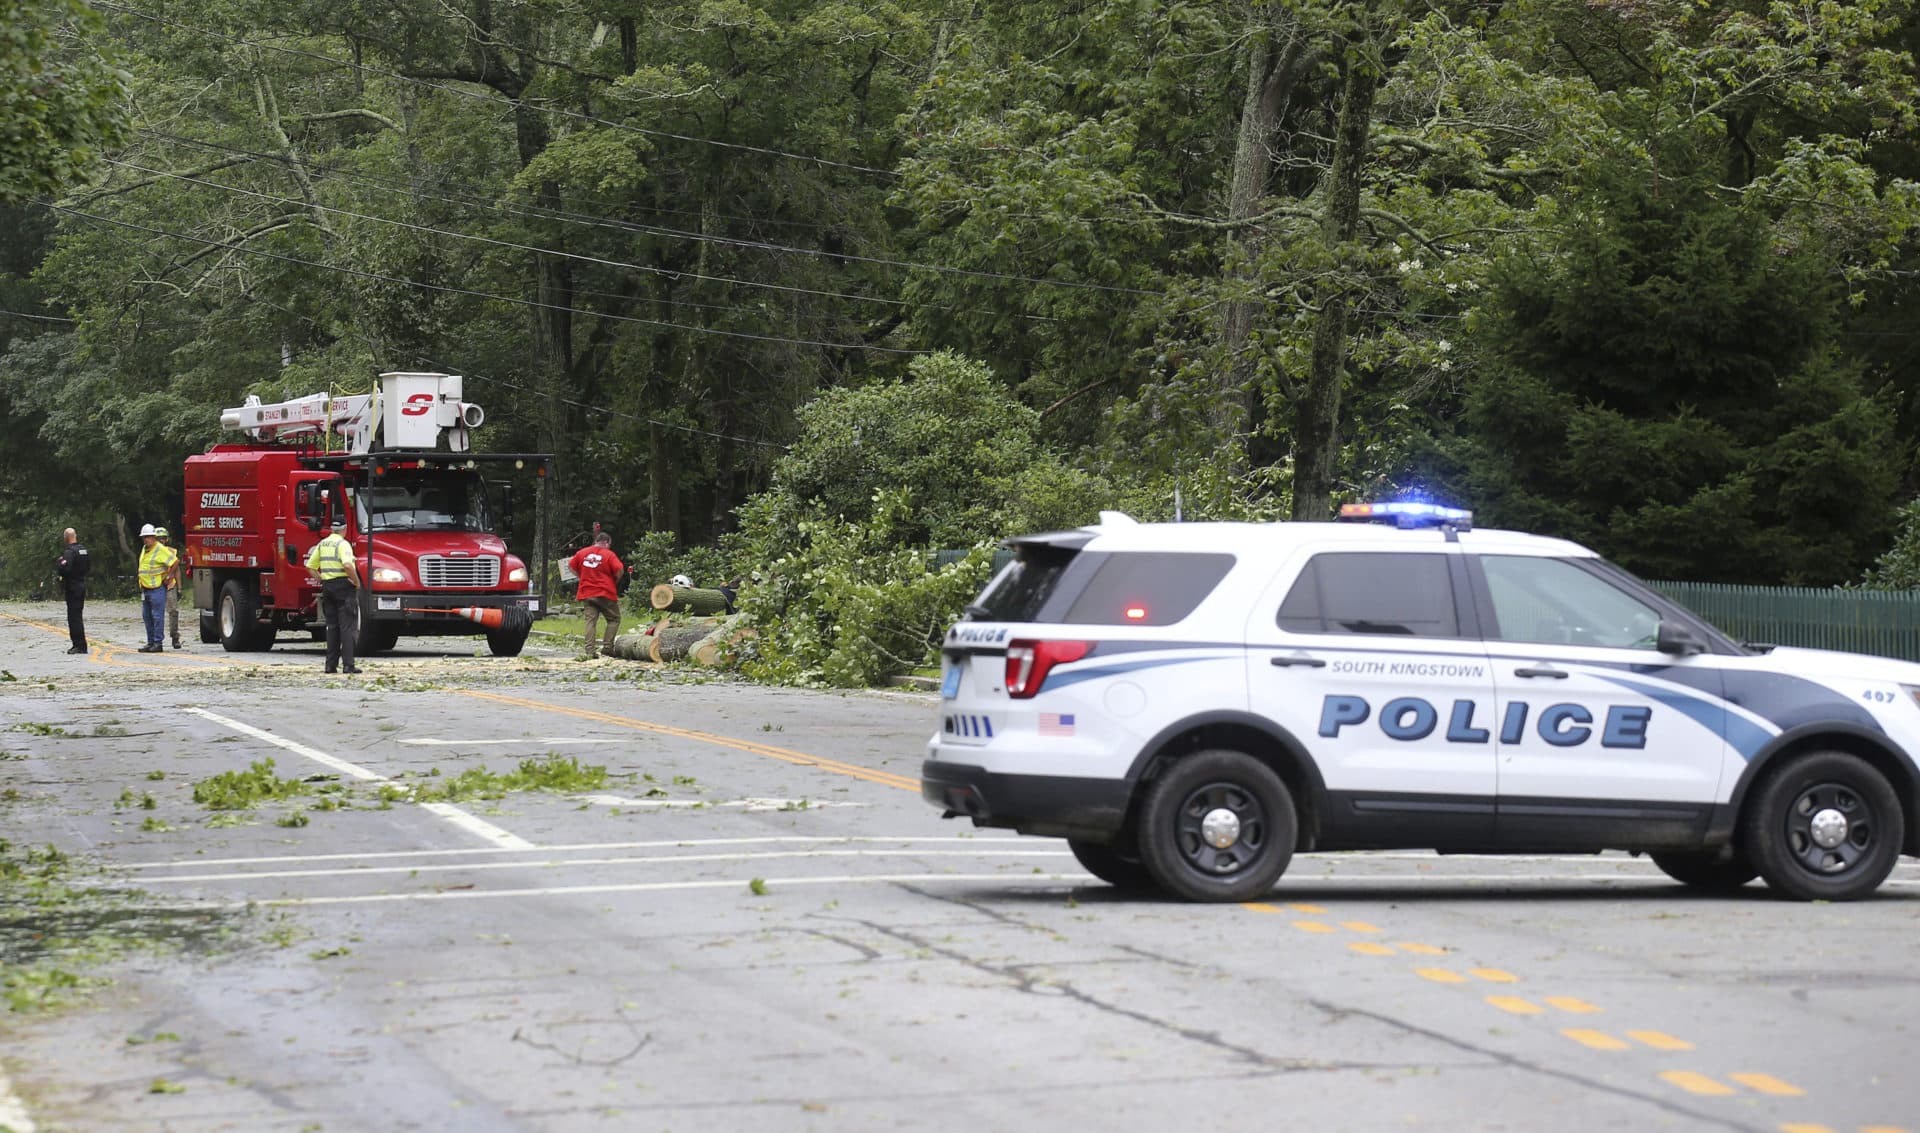 A crew works to remove a downed tree from blocking Route 138 in South Kingstown, R.I., Aug. 22, 2021. Strong winds from Tropical Storm Henri toppled many trees in the southern regional of the state. (Stew Milne/AP)